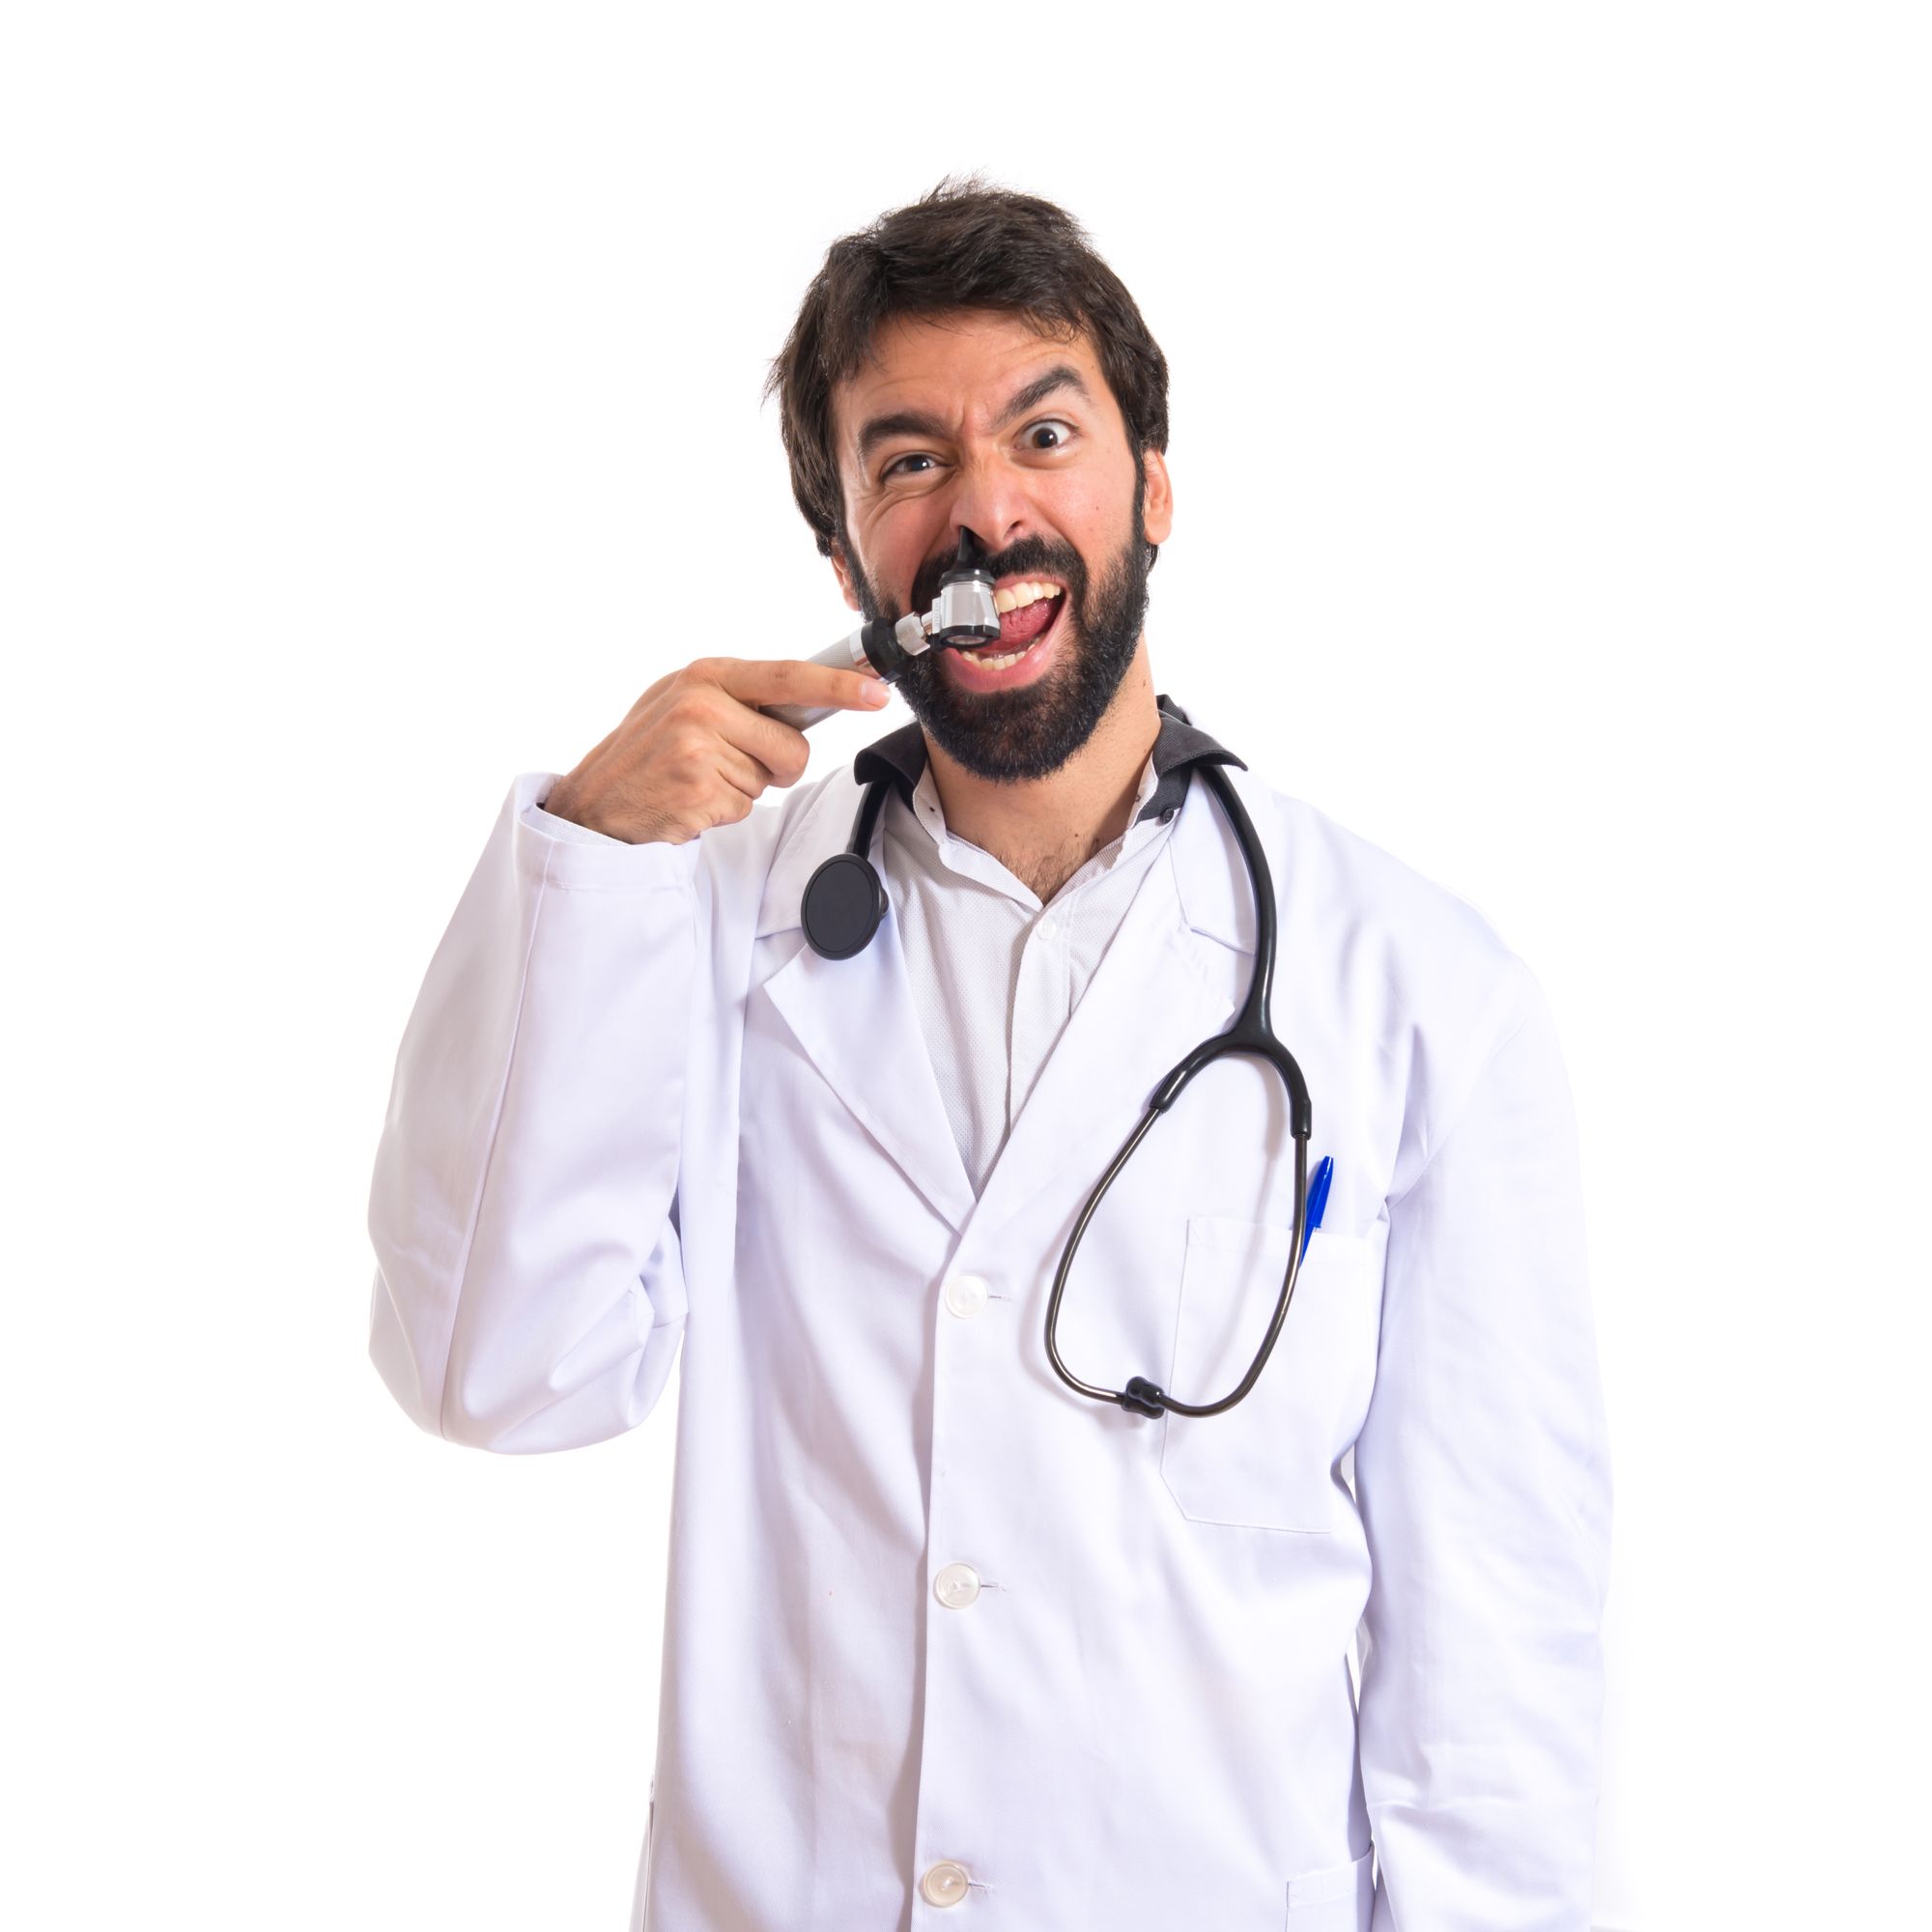 A male doctor with a beard being silly by putting an otoscope up his right nostril and grinning.